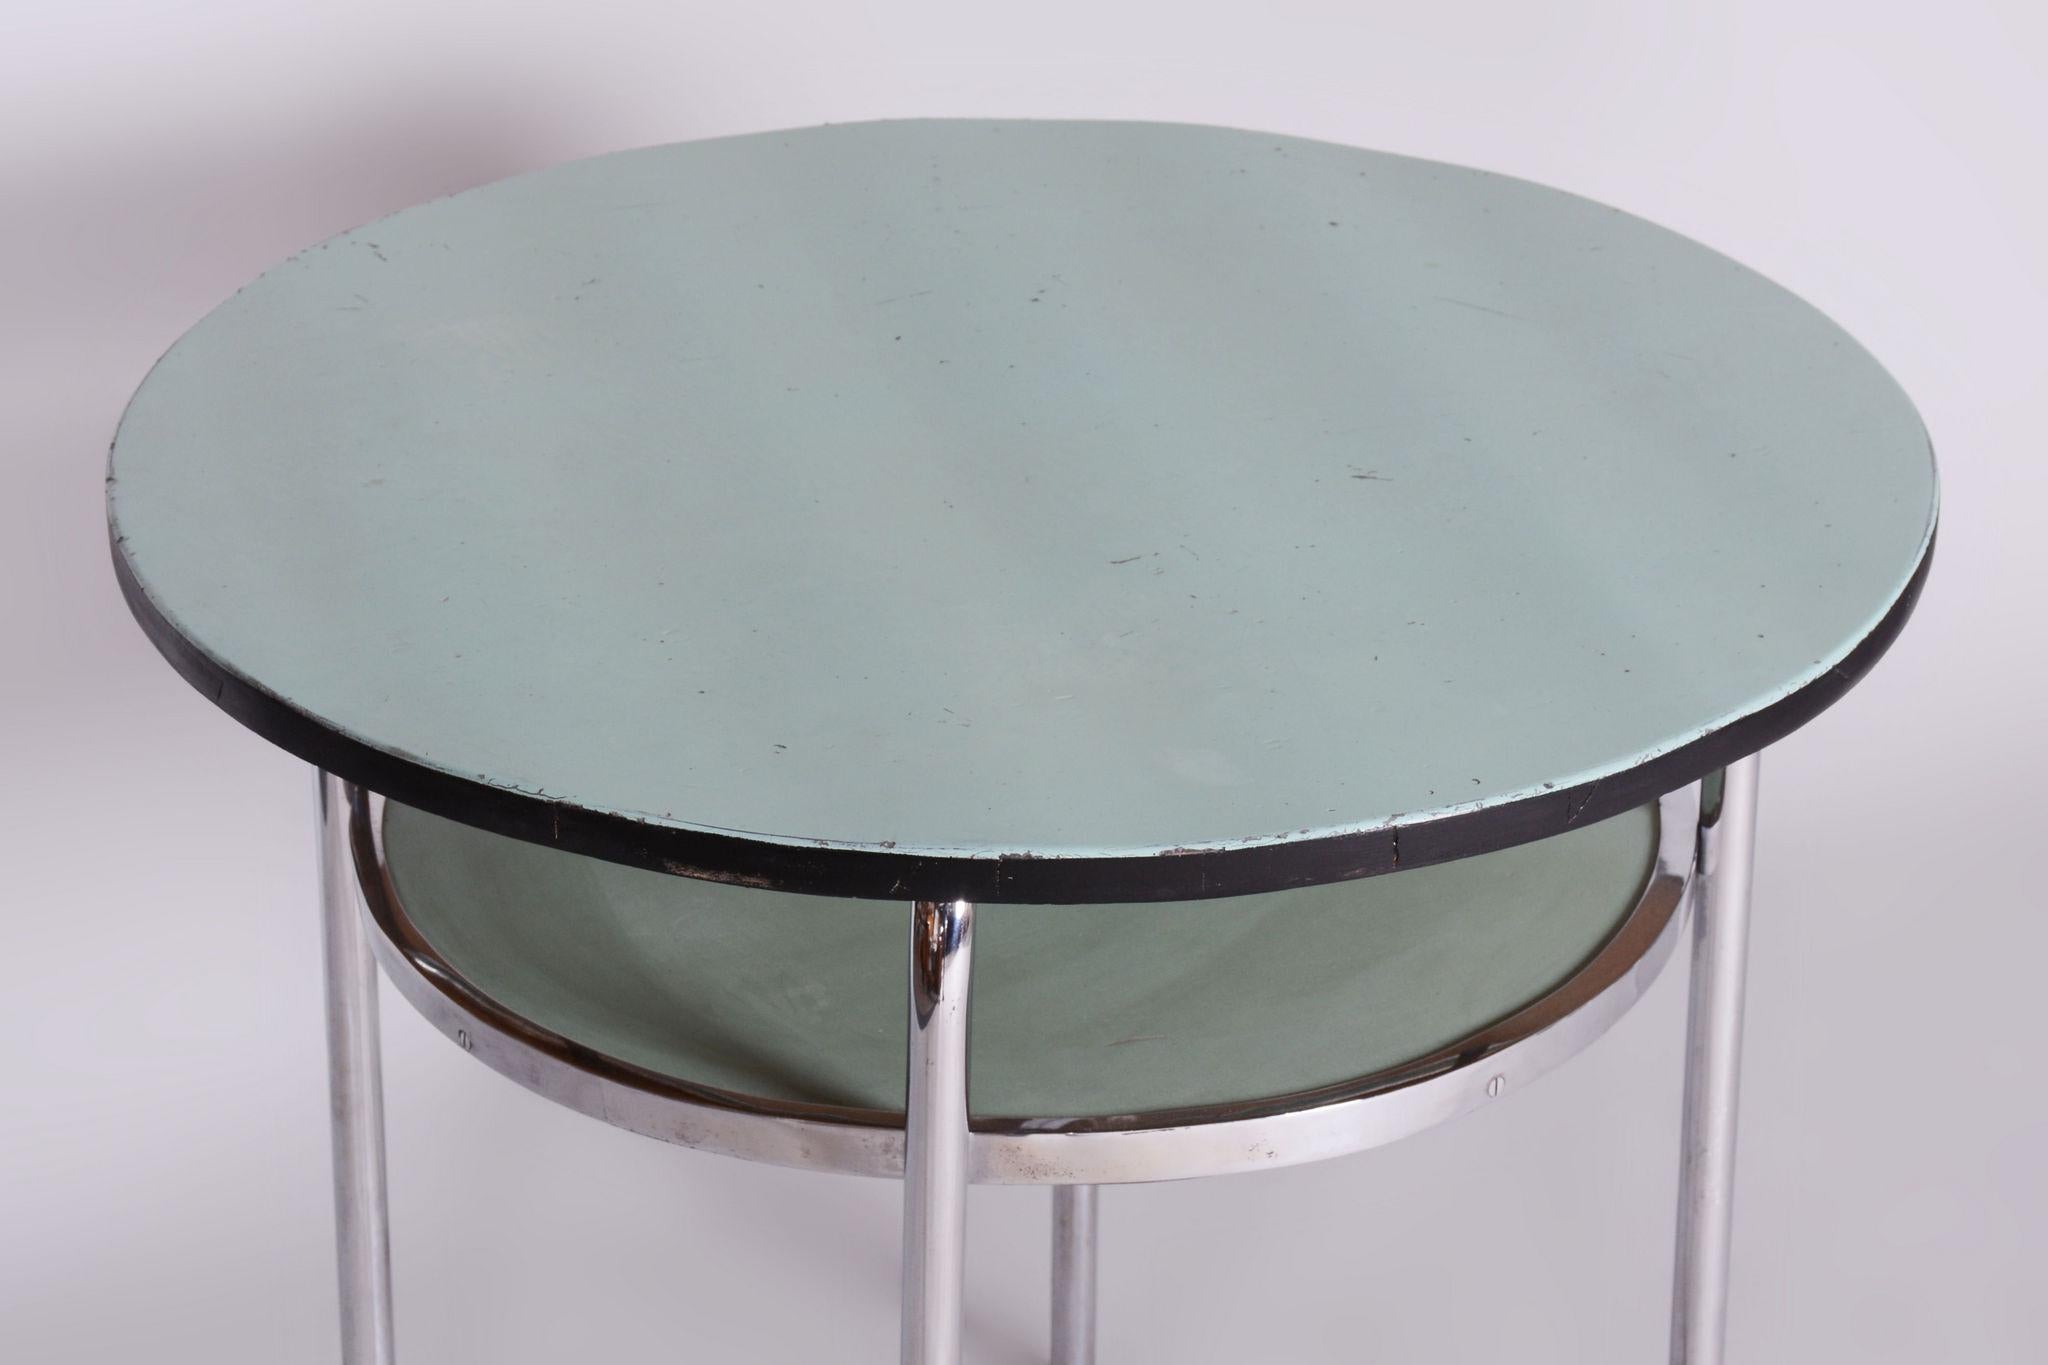 Restored Bauhaus Small Round Table, Chrome, Revived Polish, Czechia, 1930s For Sale 2